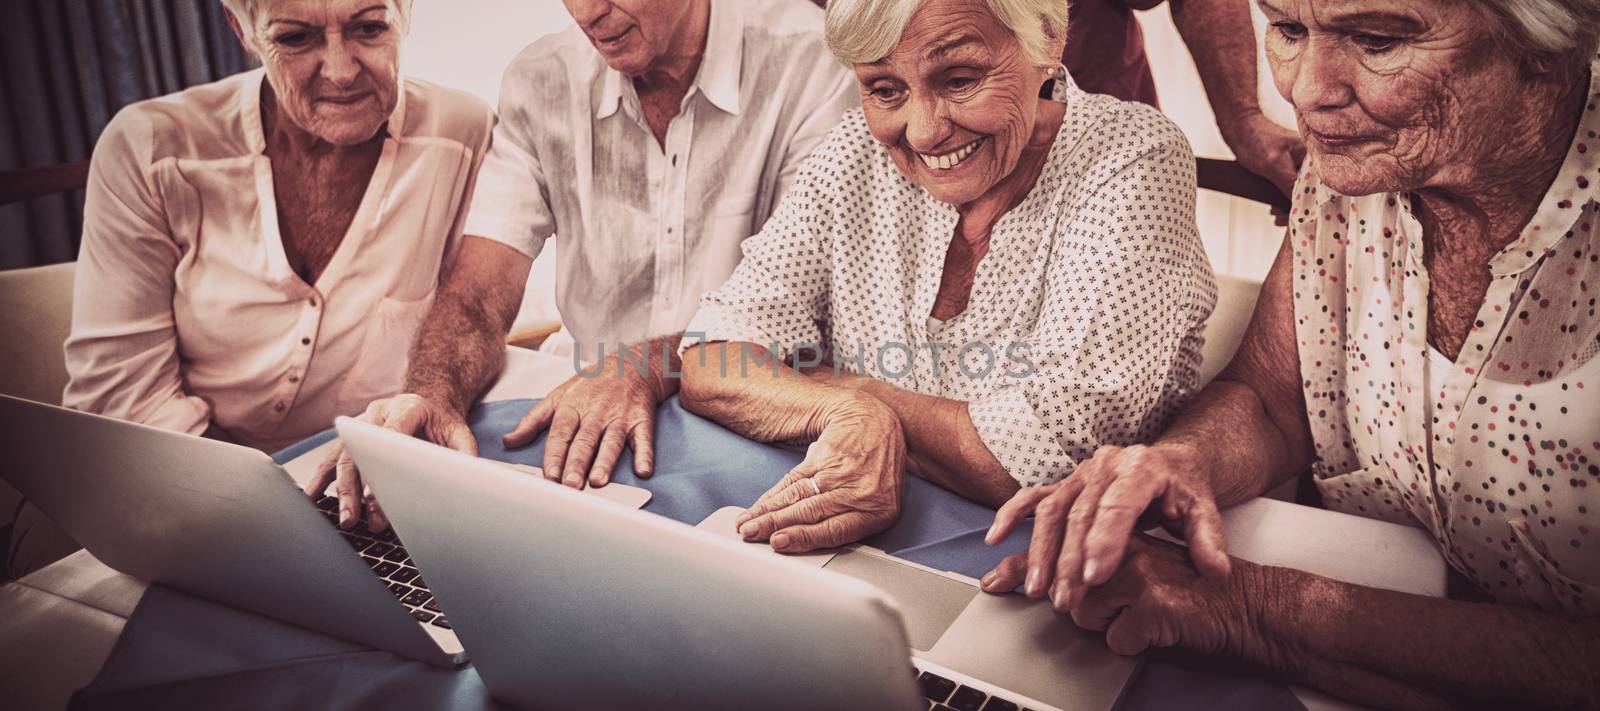 Group of seniors using a laptop by Wavebreakmedia